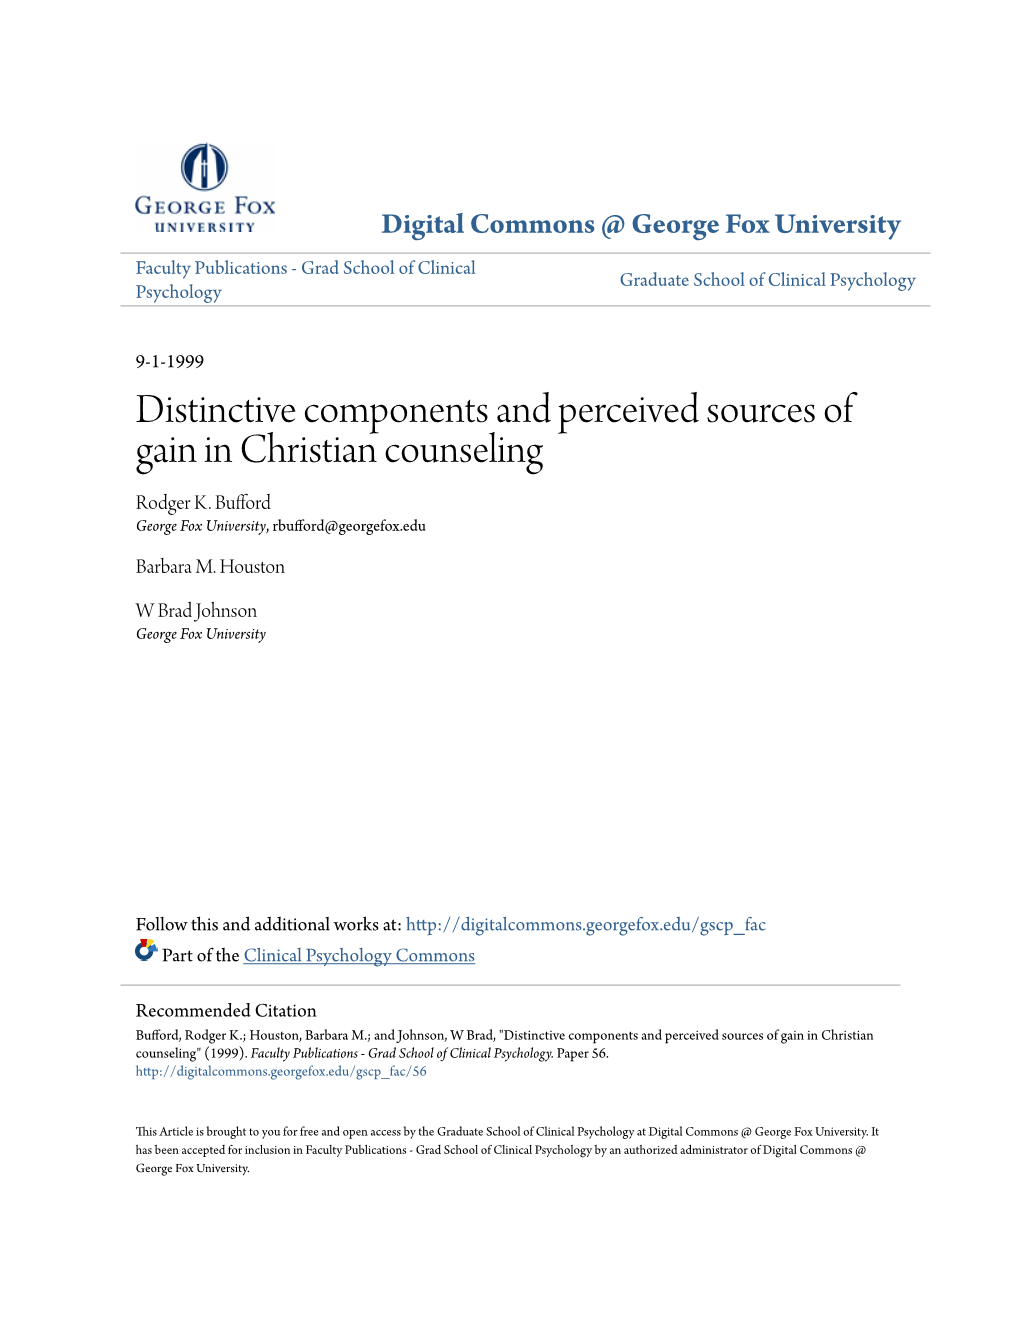 Distinctive Components and Perceived Sources of Gain in Christian Counseling Rodger K